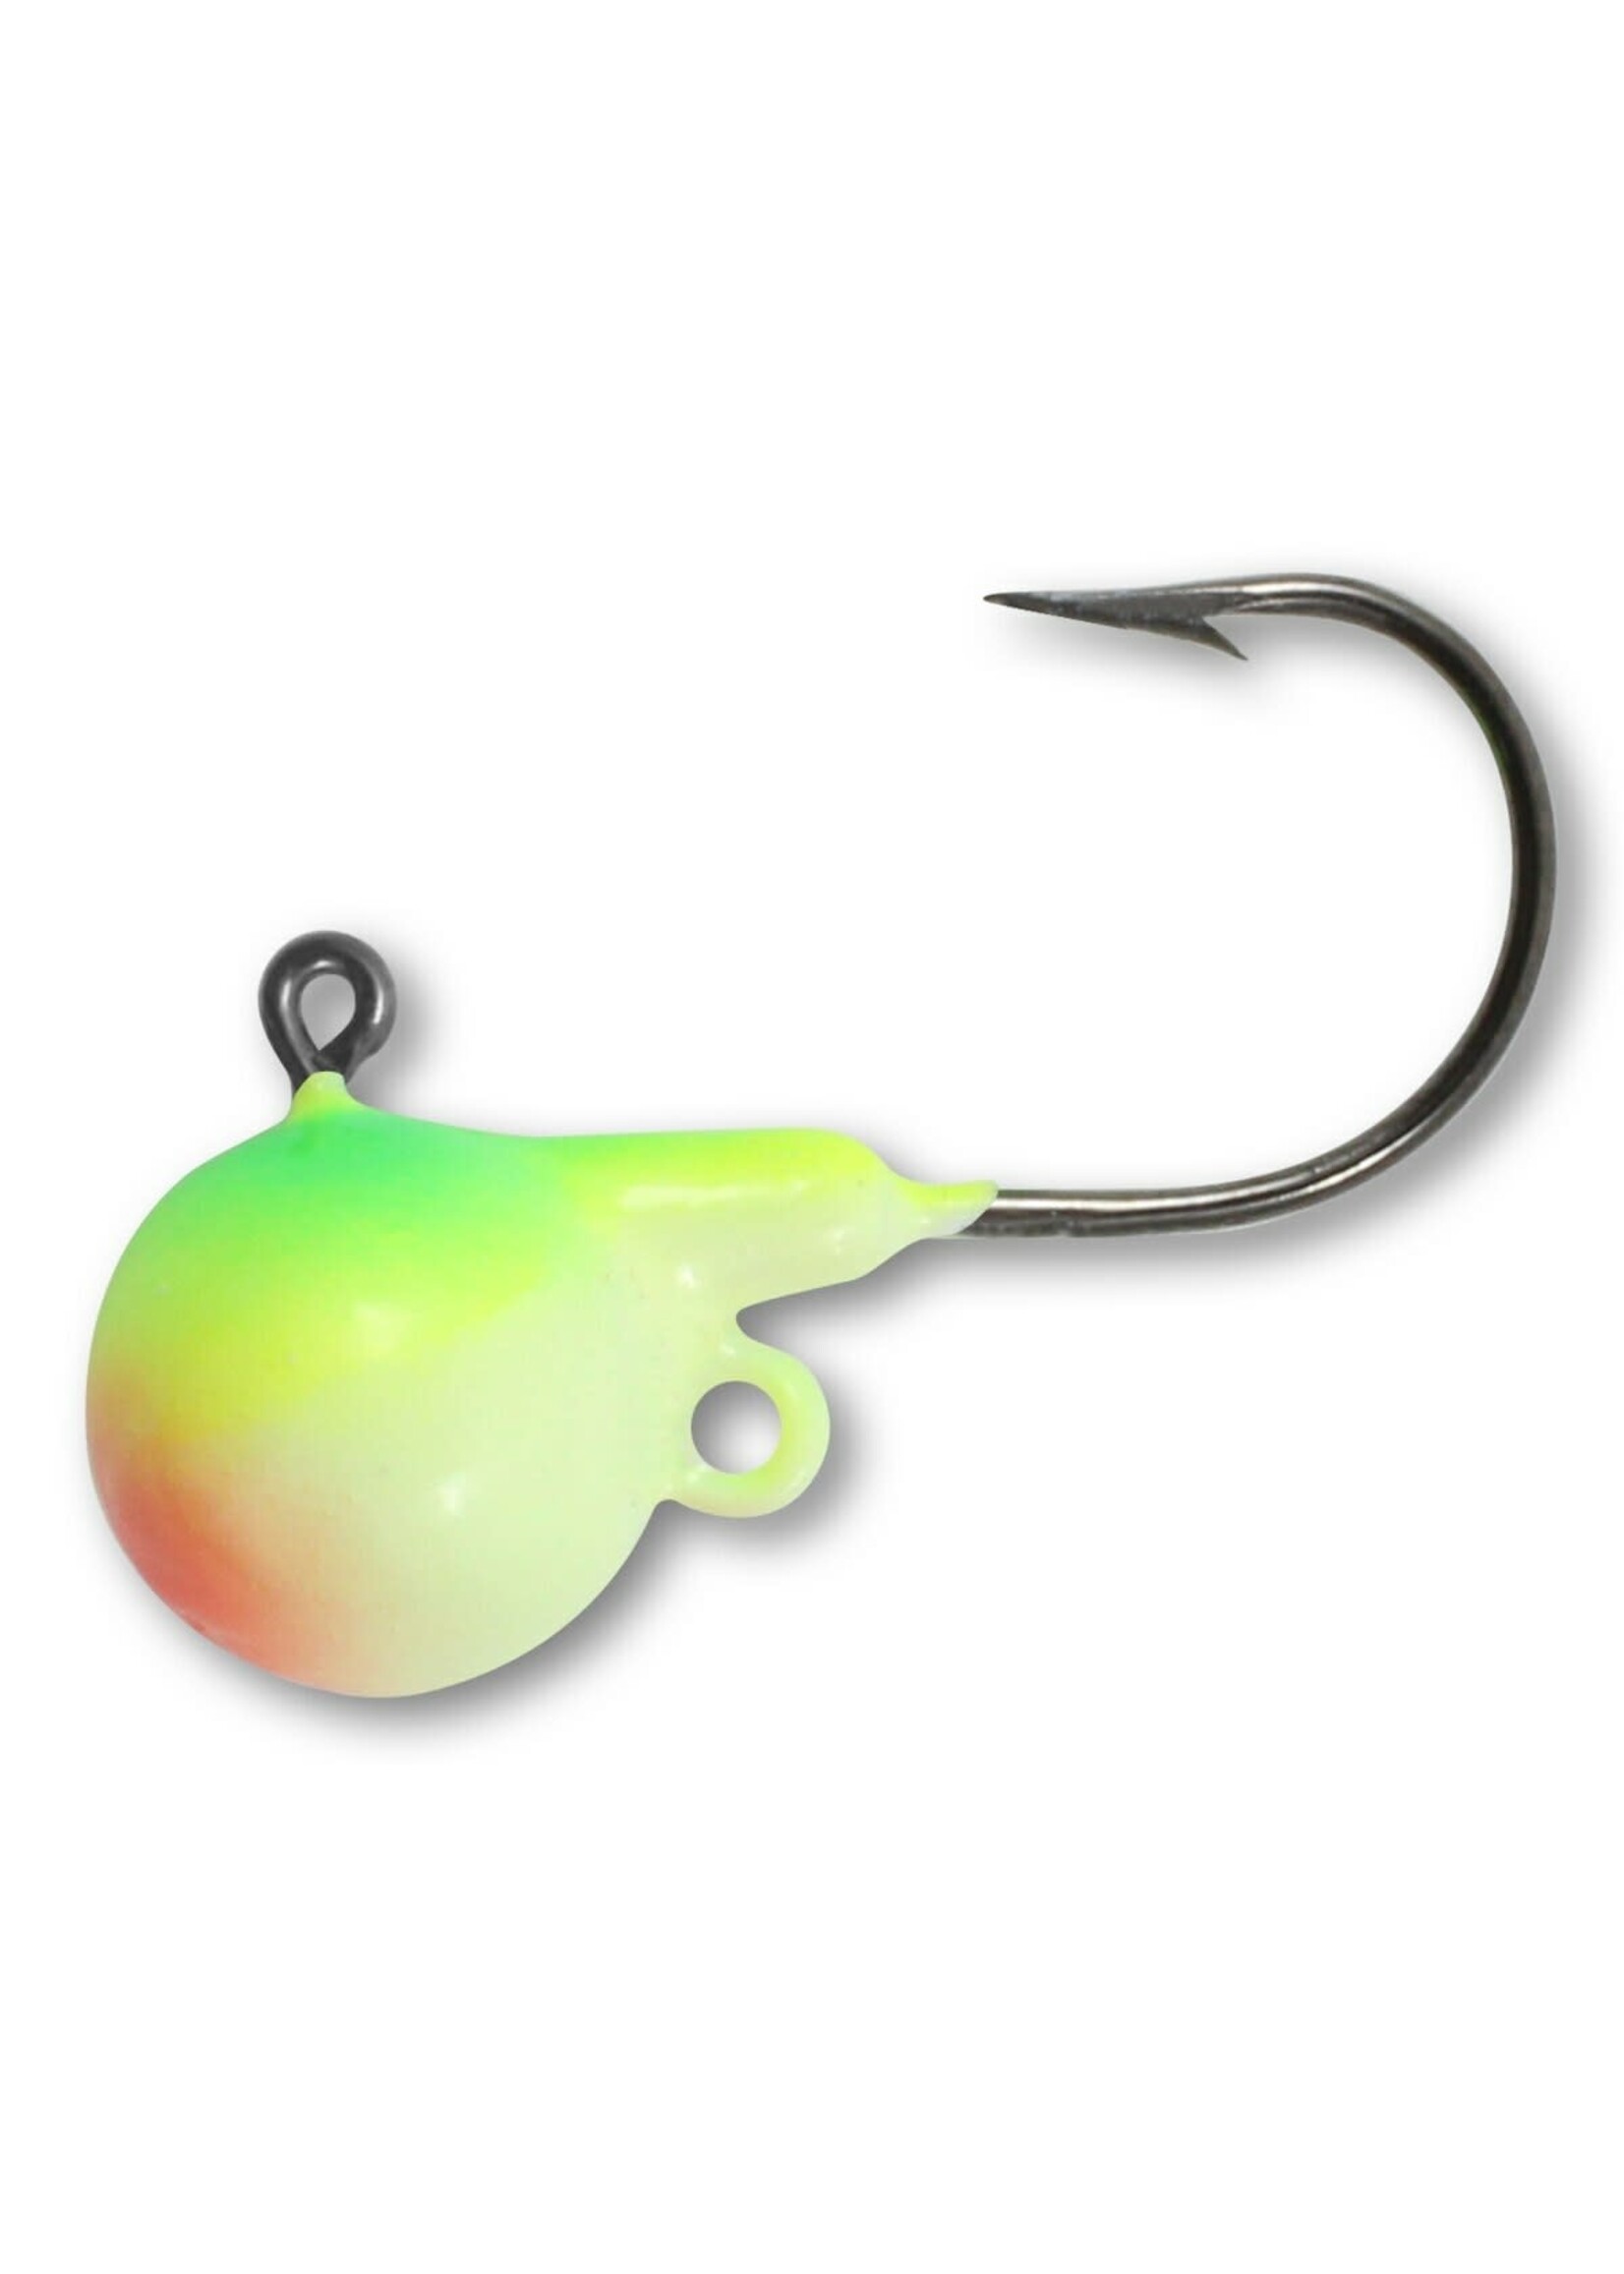 Northland Tackle Tungsten Fire-Ball UV Jig - Tackle Shack